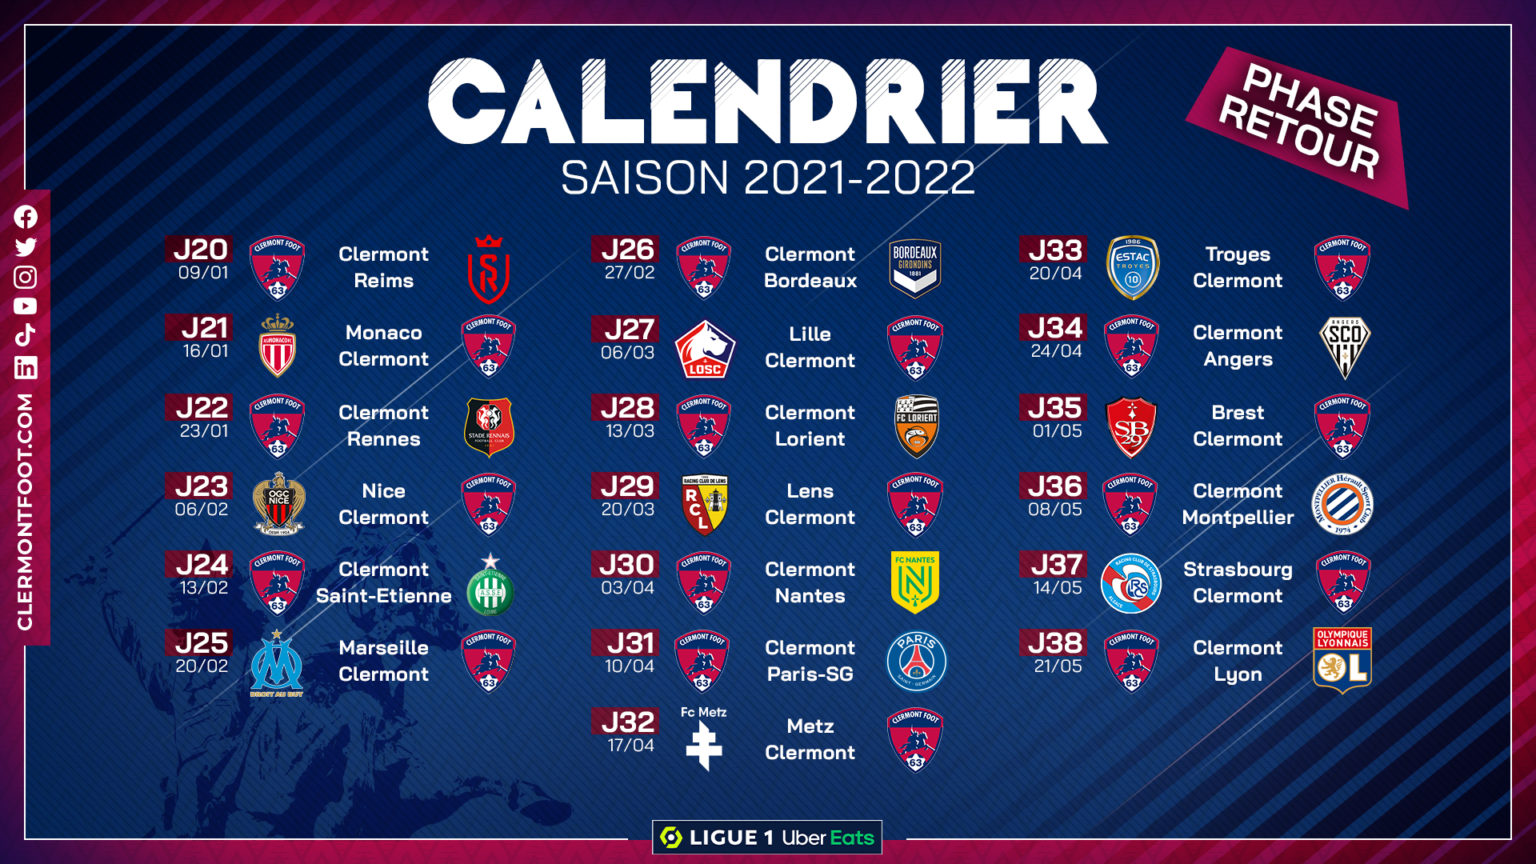 Clermont Foot : calendrier Ligue 1, 2021/2022 Calendrier-CF63_2-1-1536x864